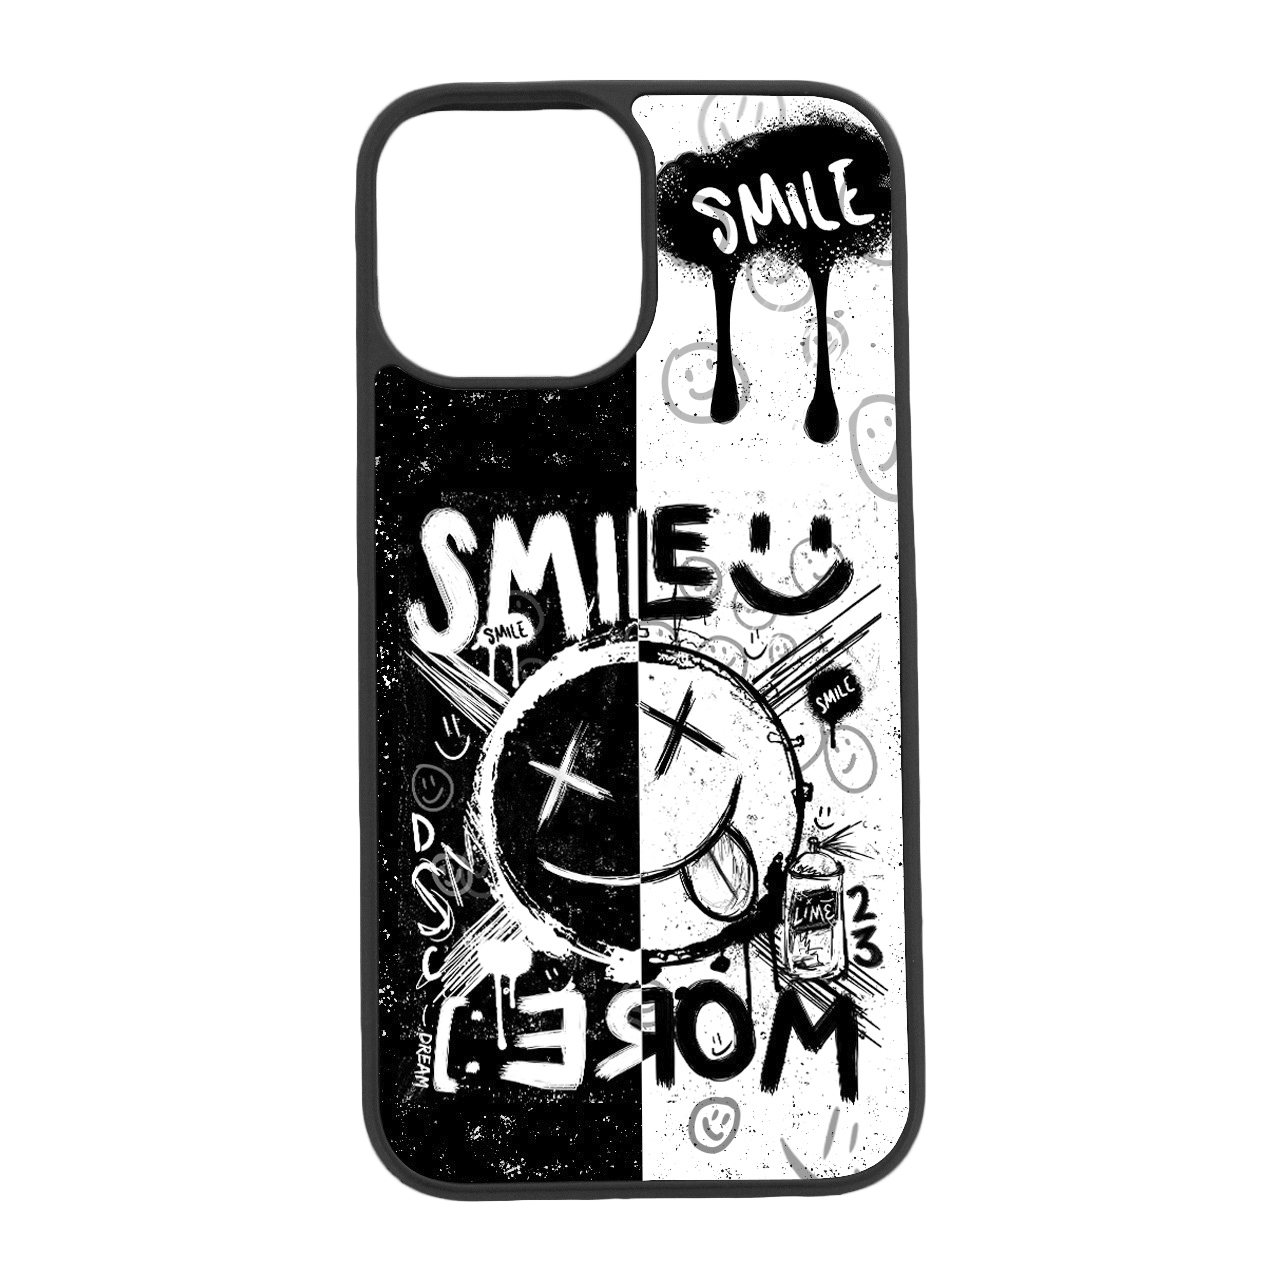 Dream January MEMBERS ONLY Smile More iPhone Case